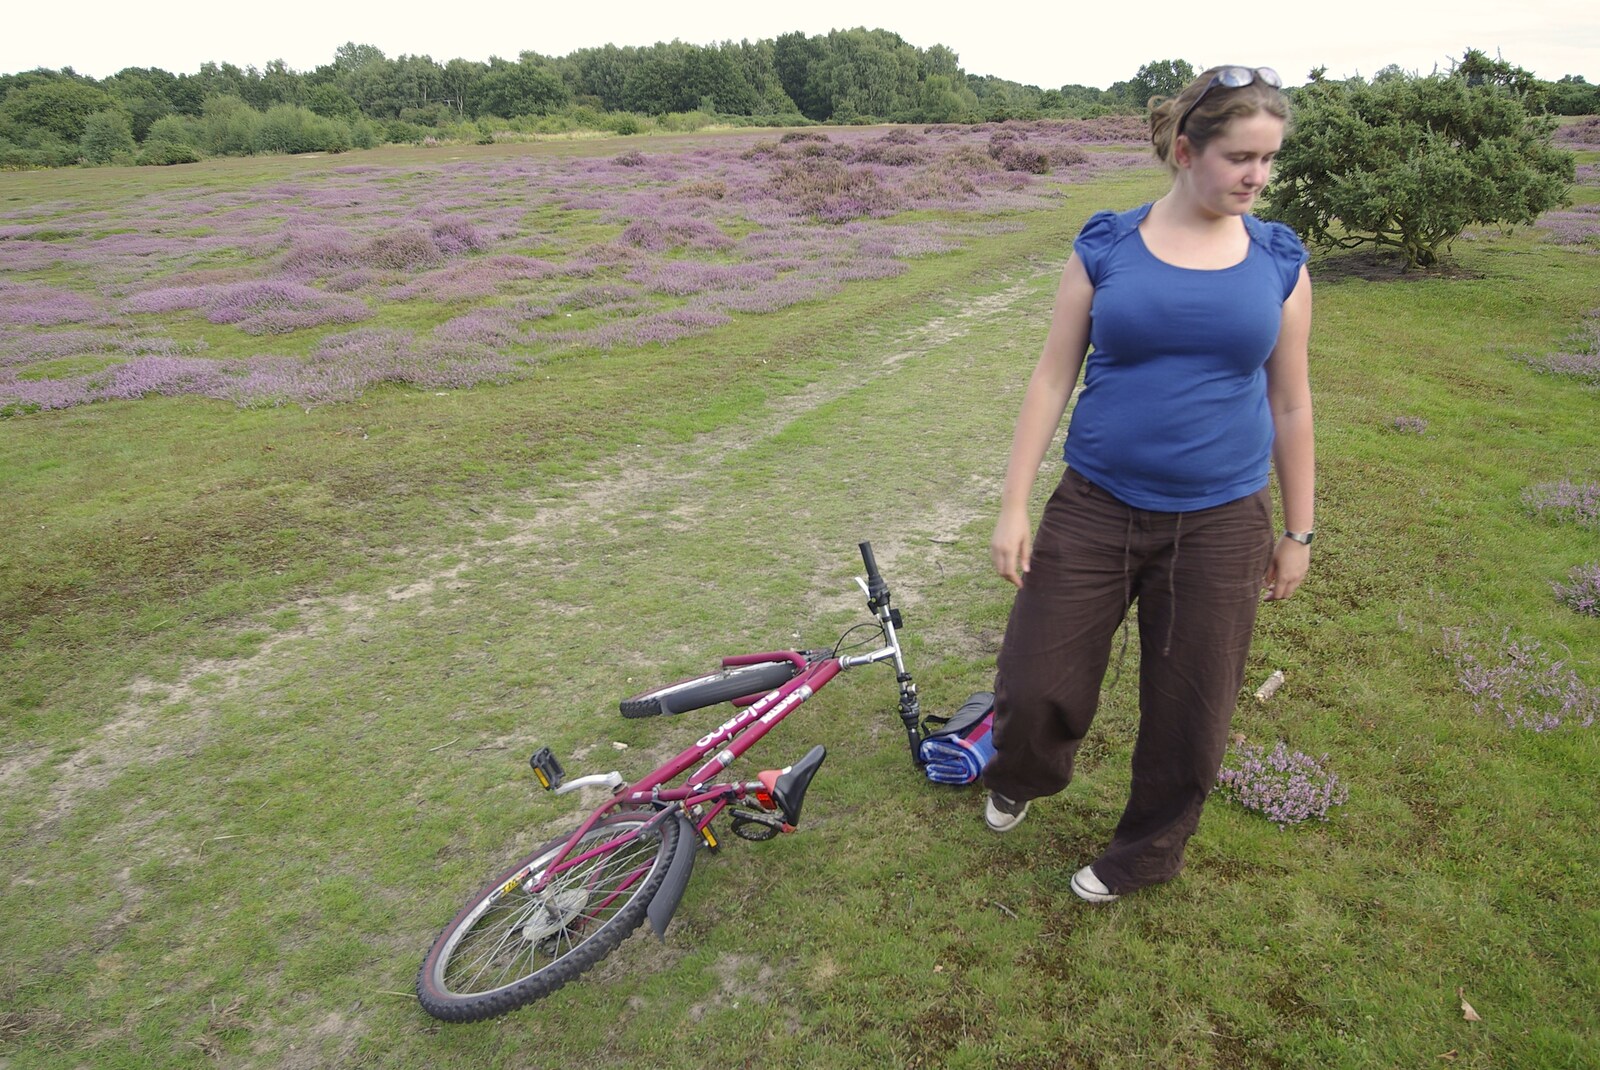 We wander a bit further, and park the bikes by the heather from A Picnic on The Ling, Wortham, Suffolk - 26th August 2007